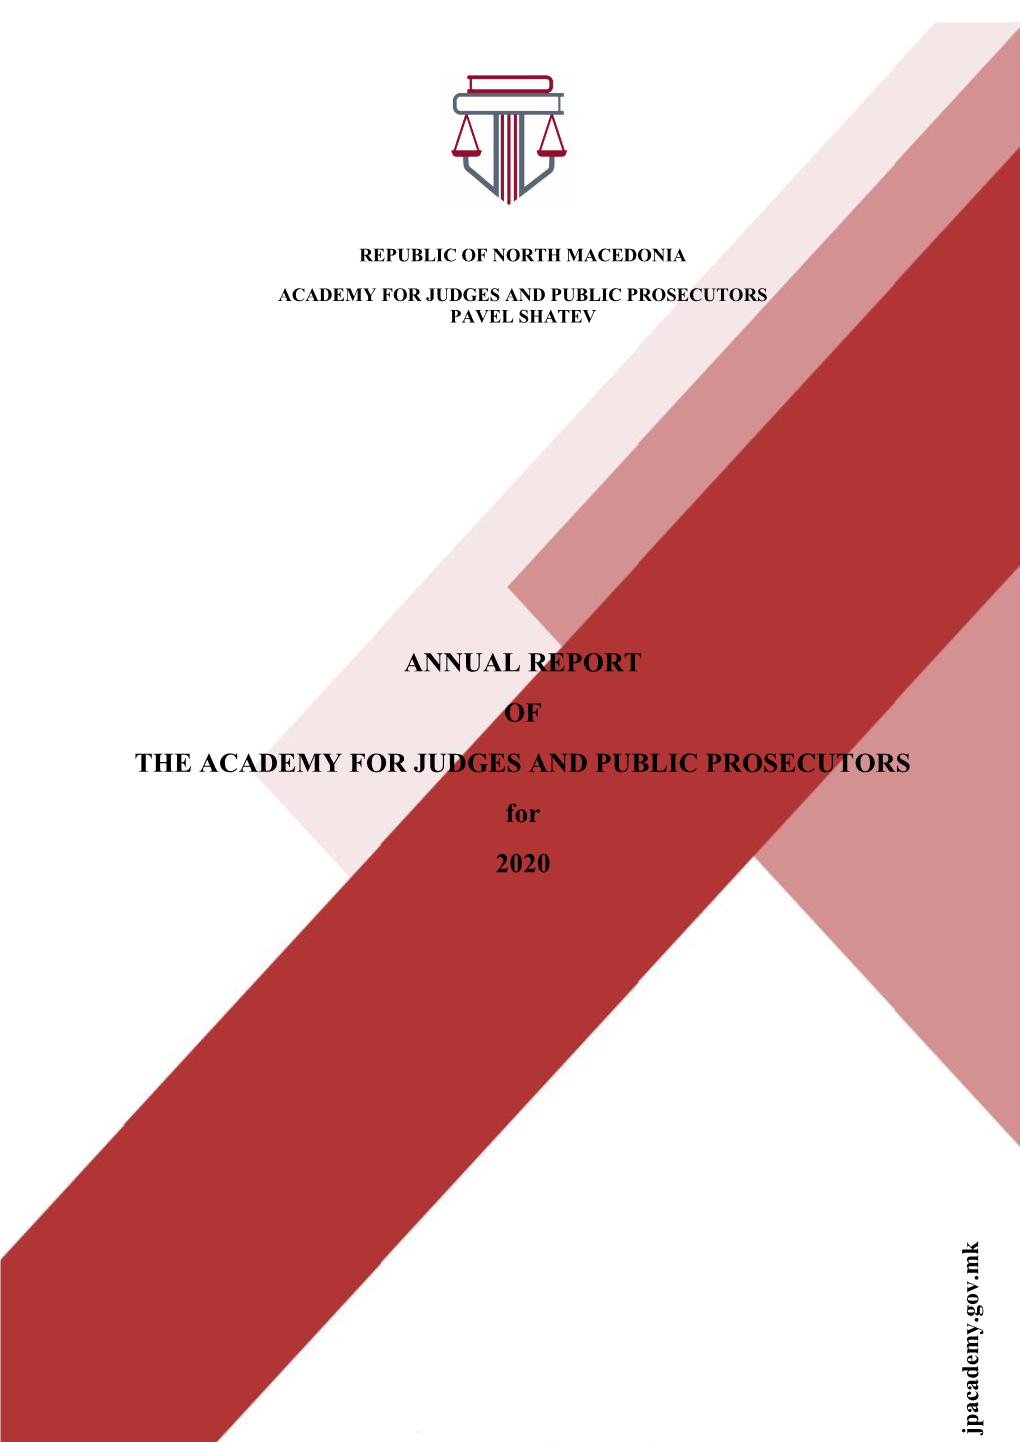 ANNUAL REPORT of the ACADEMY for JUDGES and PUBLIC PROSECUTORS for 2020